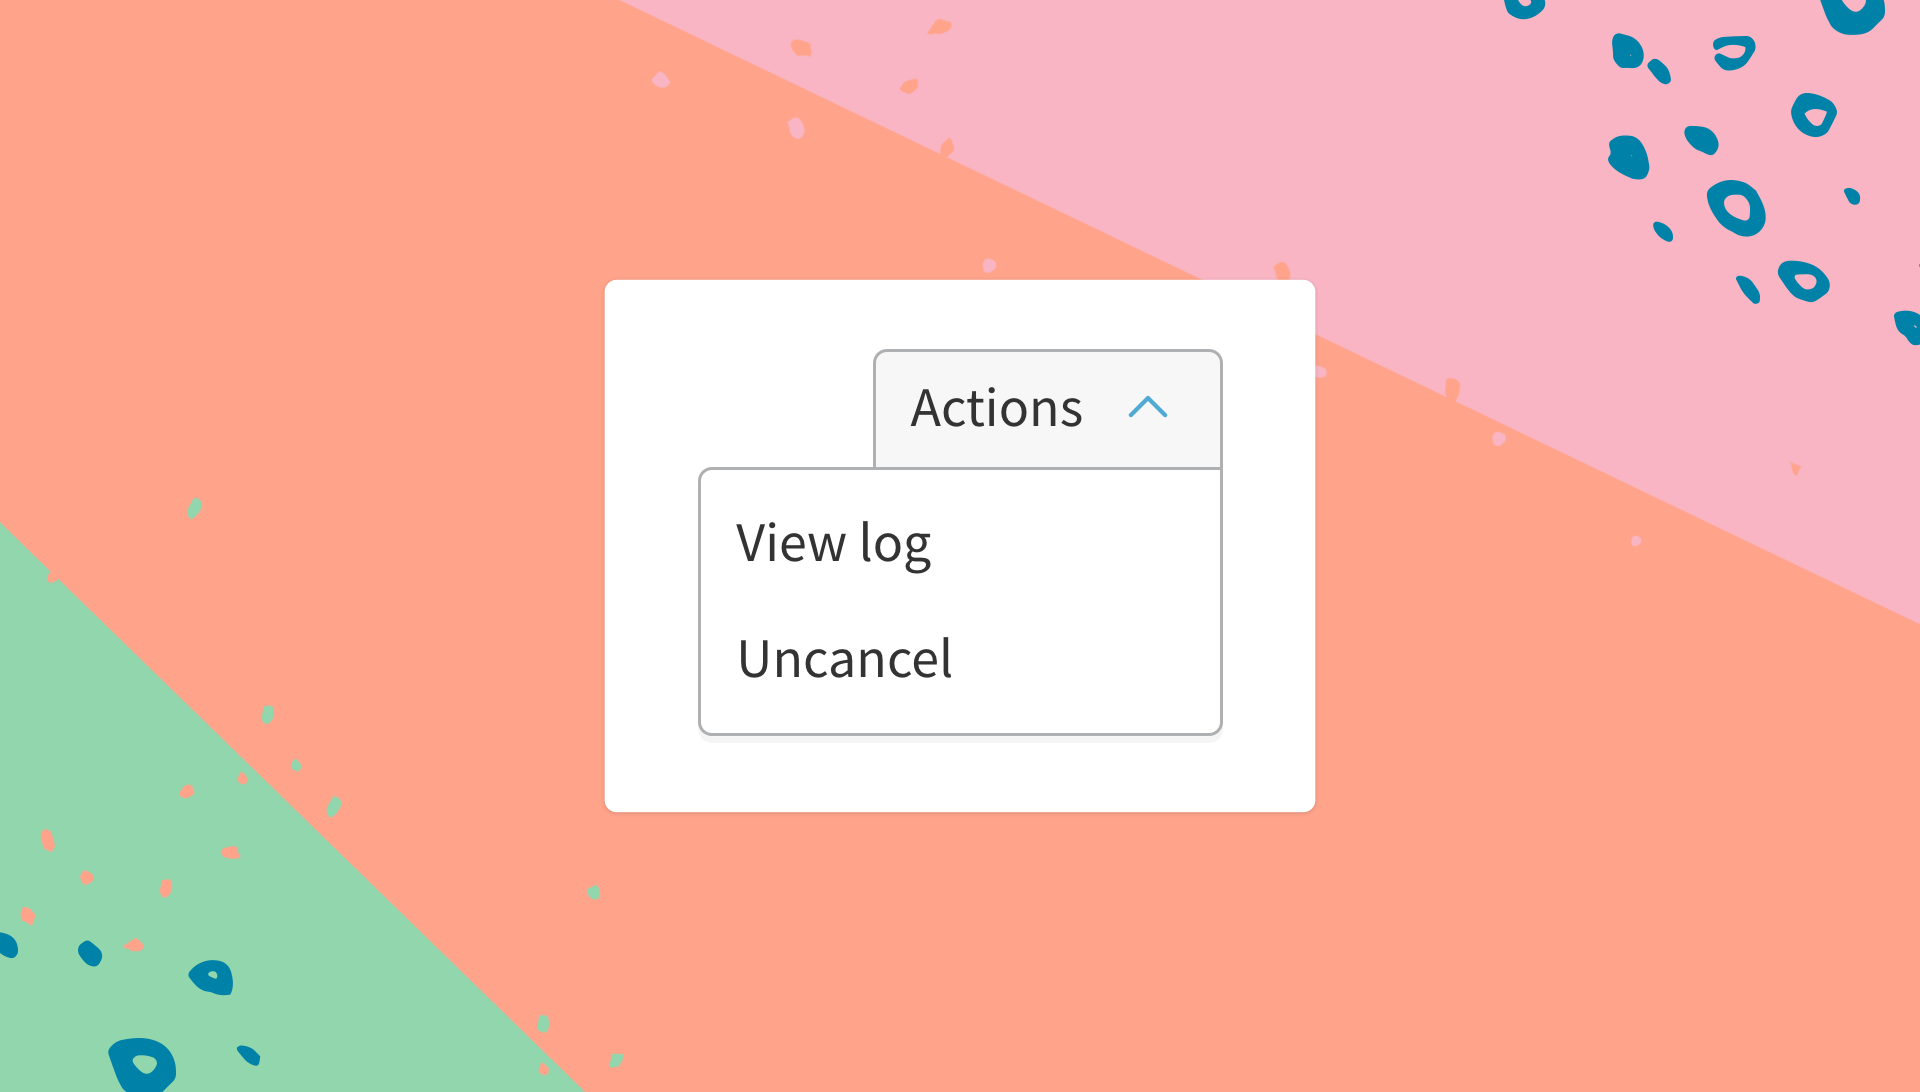 Screenshot of the Actions drop-down menu in Cliniko showing View log and Uncancel options.